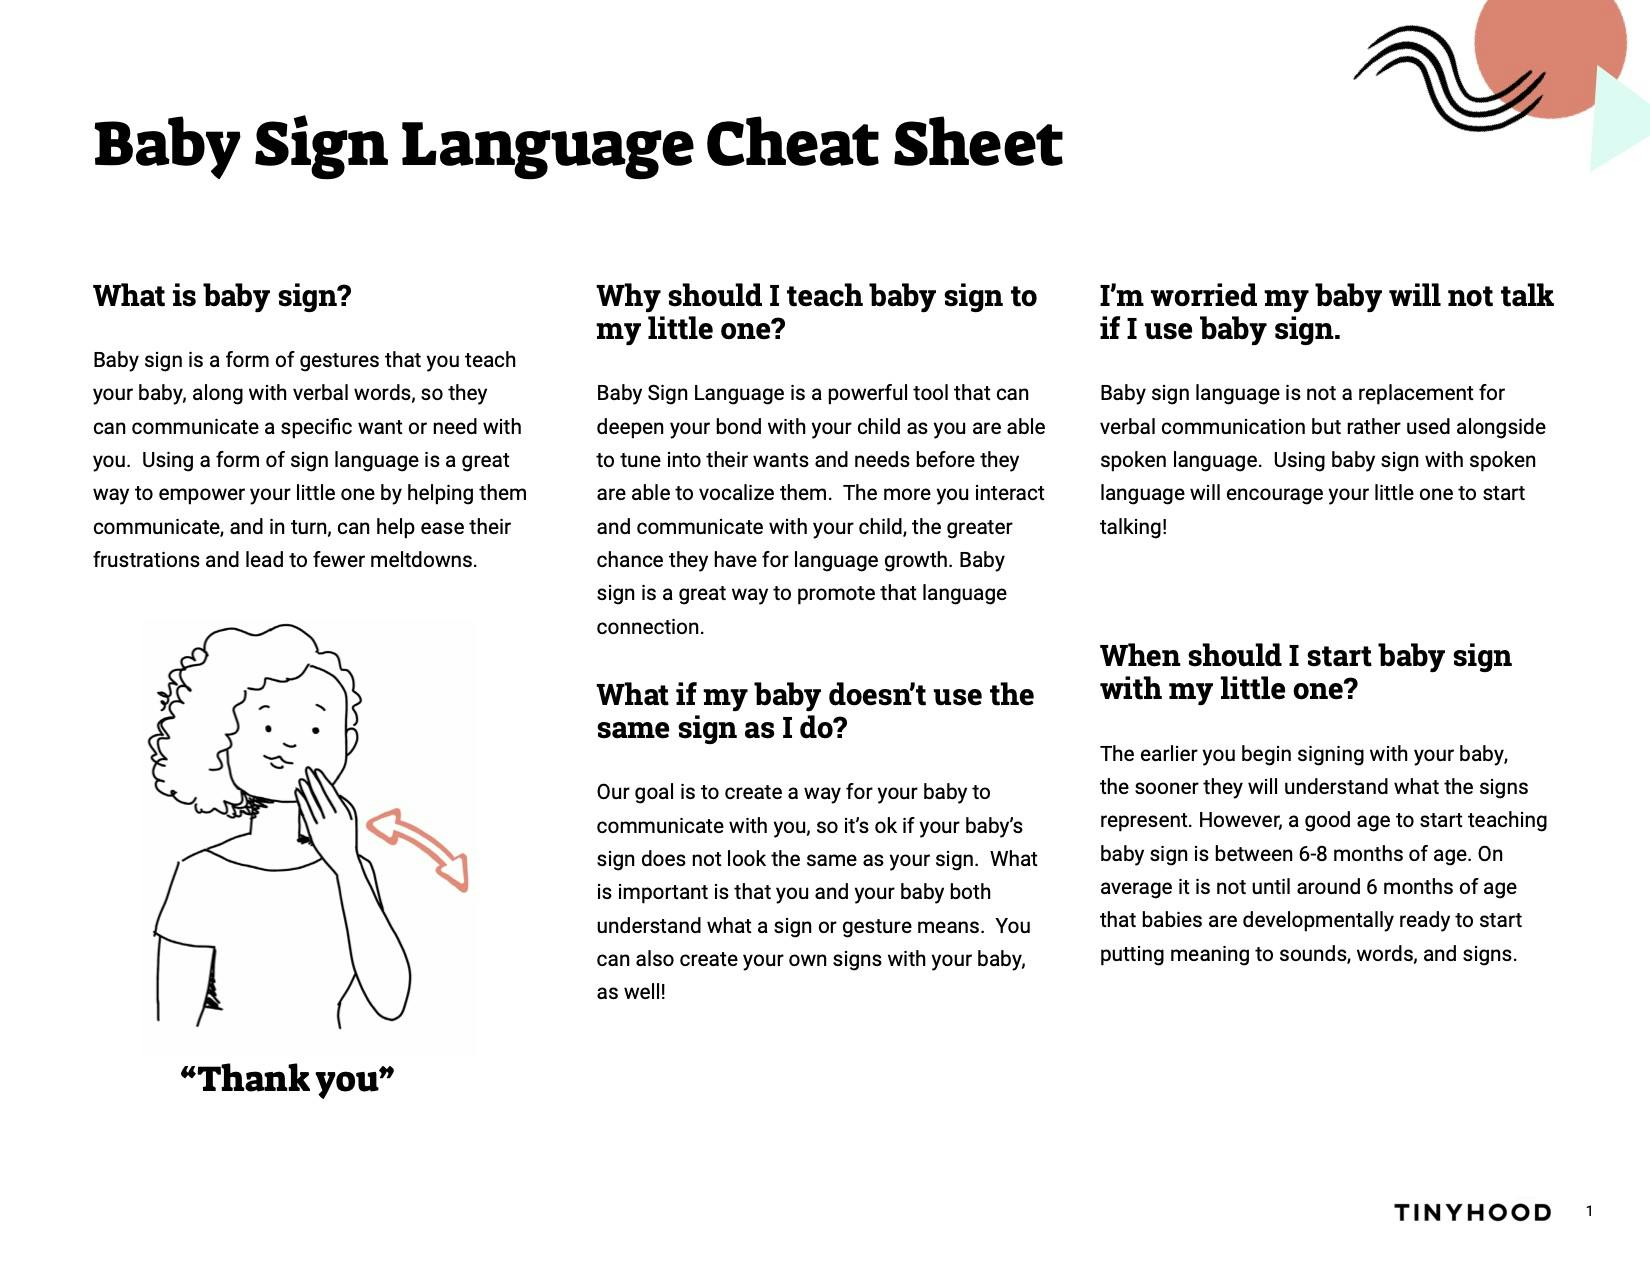 Preview image of Handout: Baby Sign Language Cheat Sheet